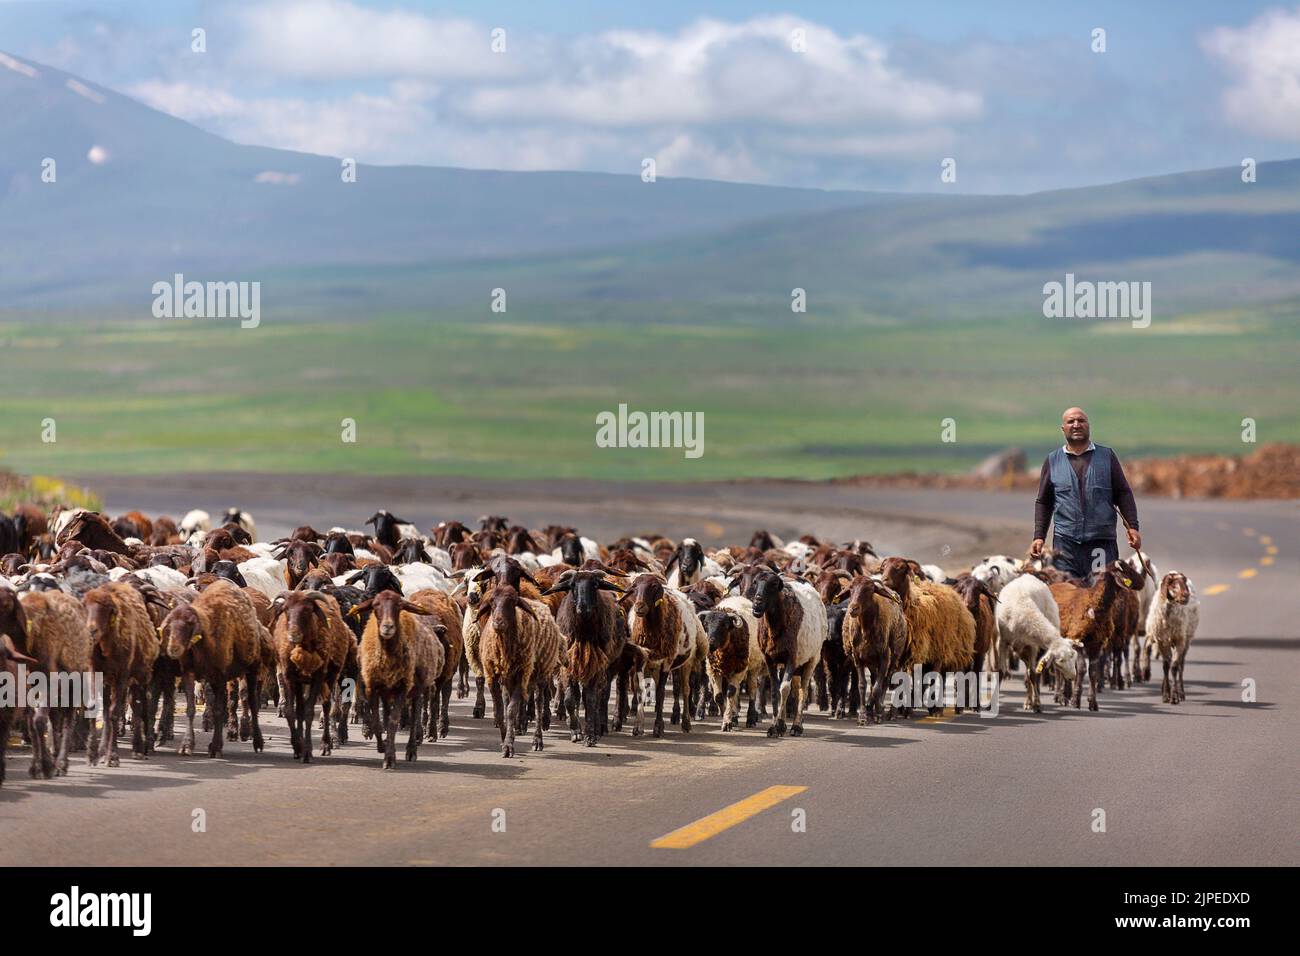 Shepherd and his flock of sheep walk on the road near the town of Digor, Turkey Stock Photo